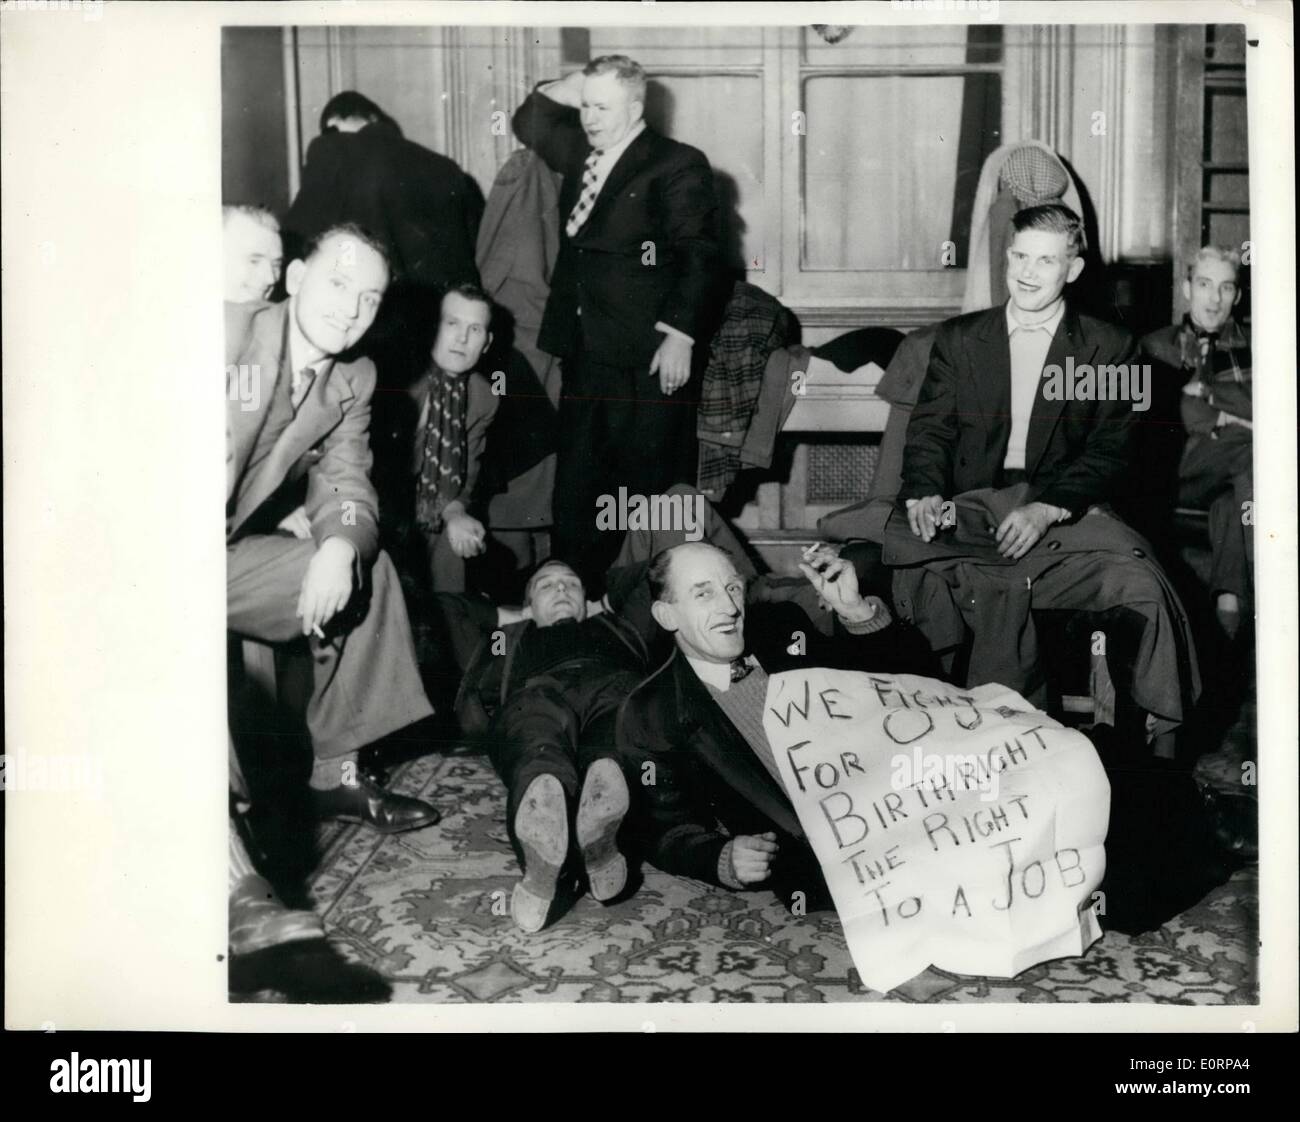 Feb. 02, 1960 - Miners Sit-Down Strike.: The stay-down pit strikers staged a six-hour sit-down strike yesterday, in the Coal Board's headquarters in London. Four hundred men from Betteshanger Colliery, Kent, had marched round and round Hobart House carrying banners protesting at the 140 redundancy notices at the pit. Then 100 of them walked into the building and camped down in Conference Room No. 16. The/refused to budge until Sir James Bowman Chairman of the National Coal Board, talked to them about the notices Stock Photo